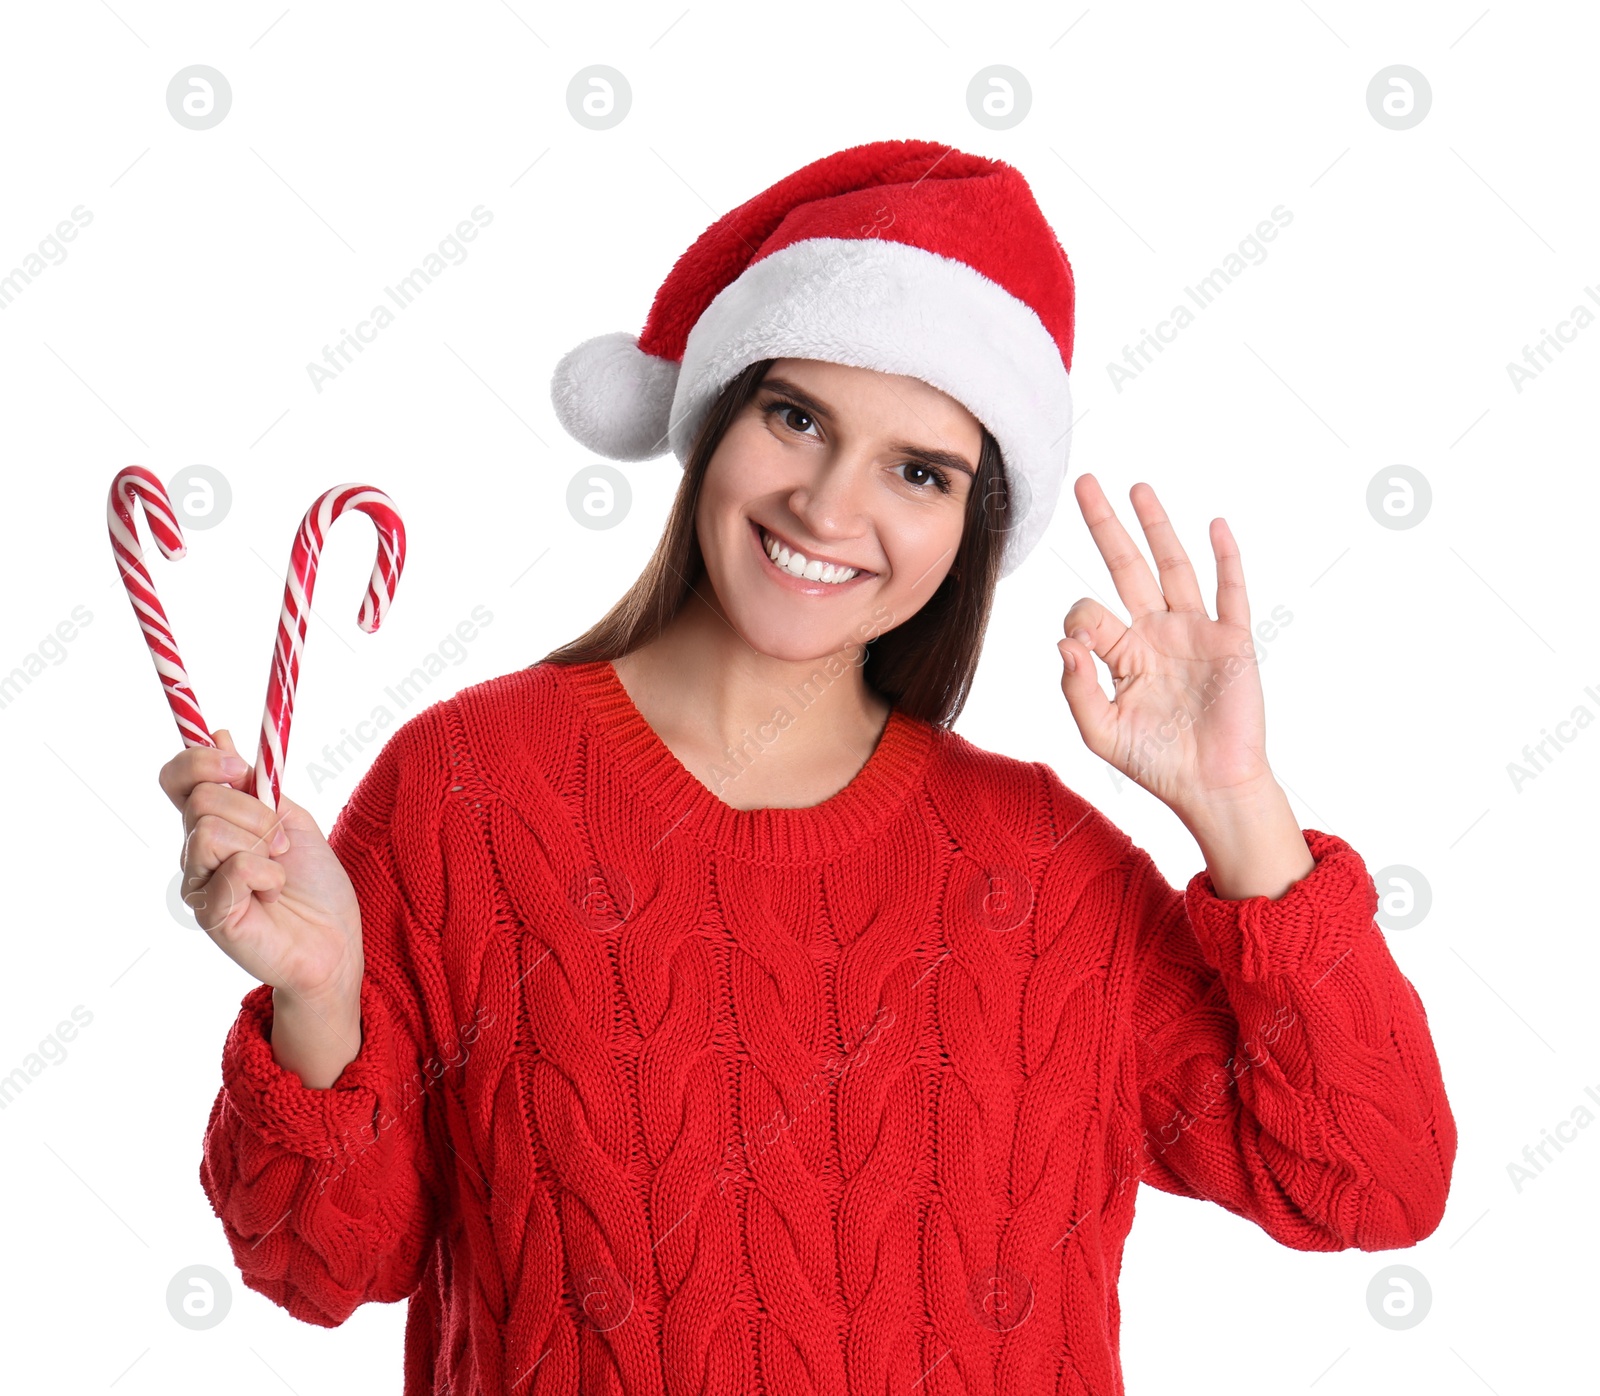 Photo of Pretty woman in Santa hat and red sweater holding candy canes on white background